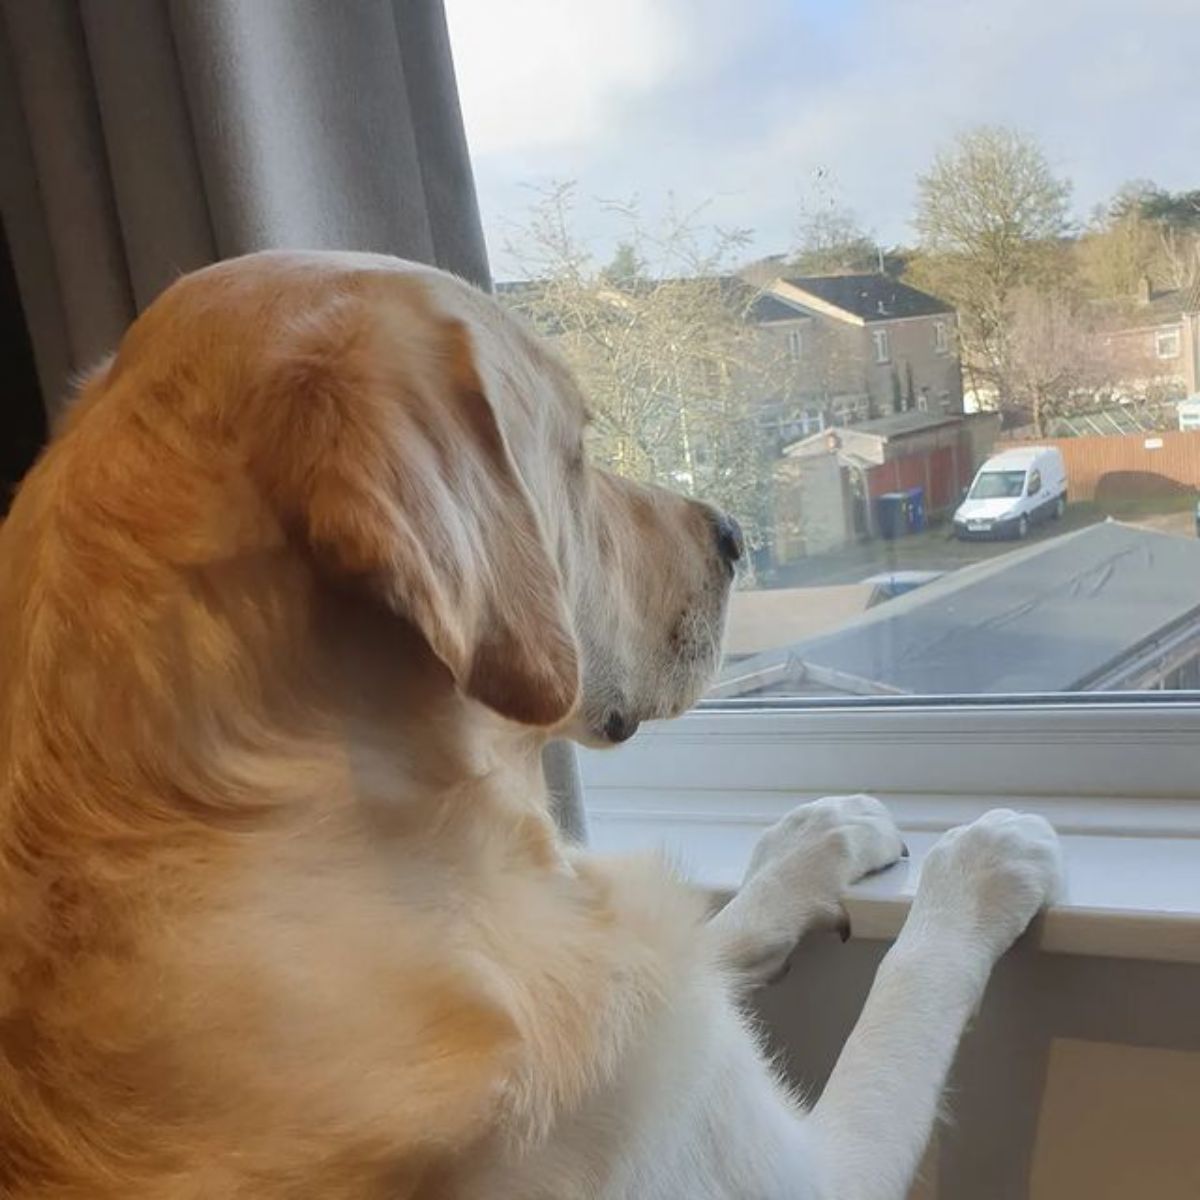 golden retriever with front paws on a window sill and looking out the window